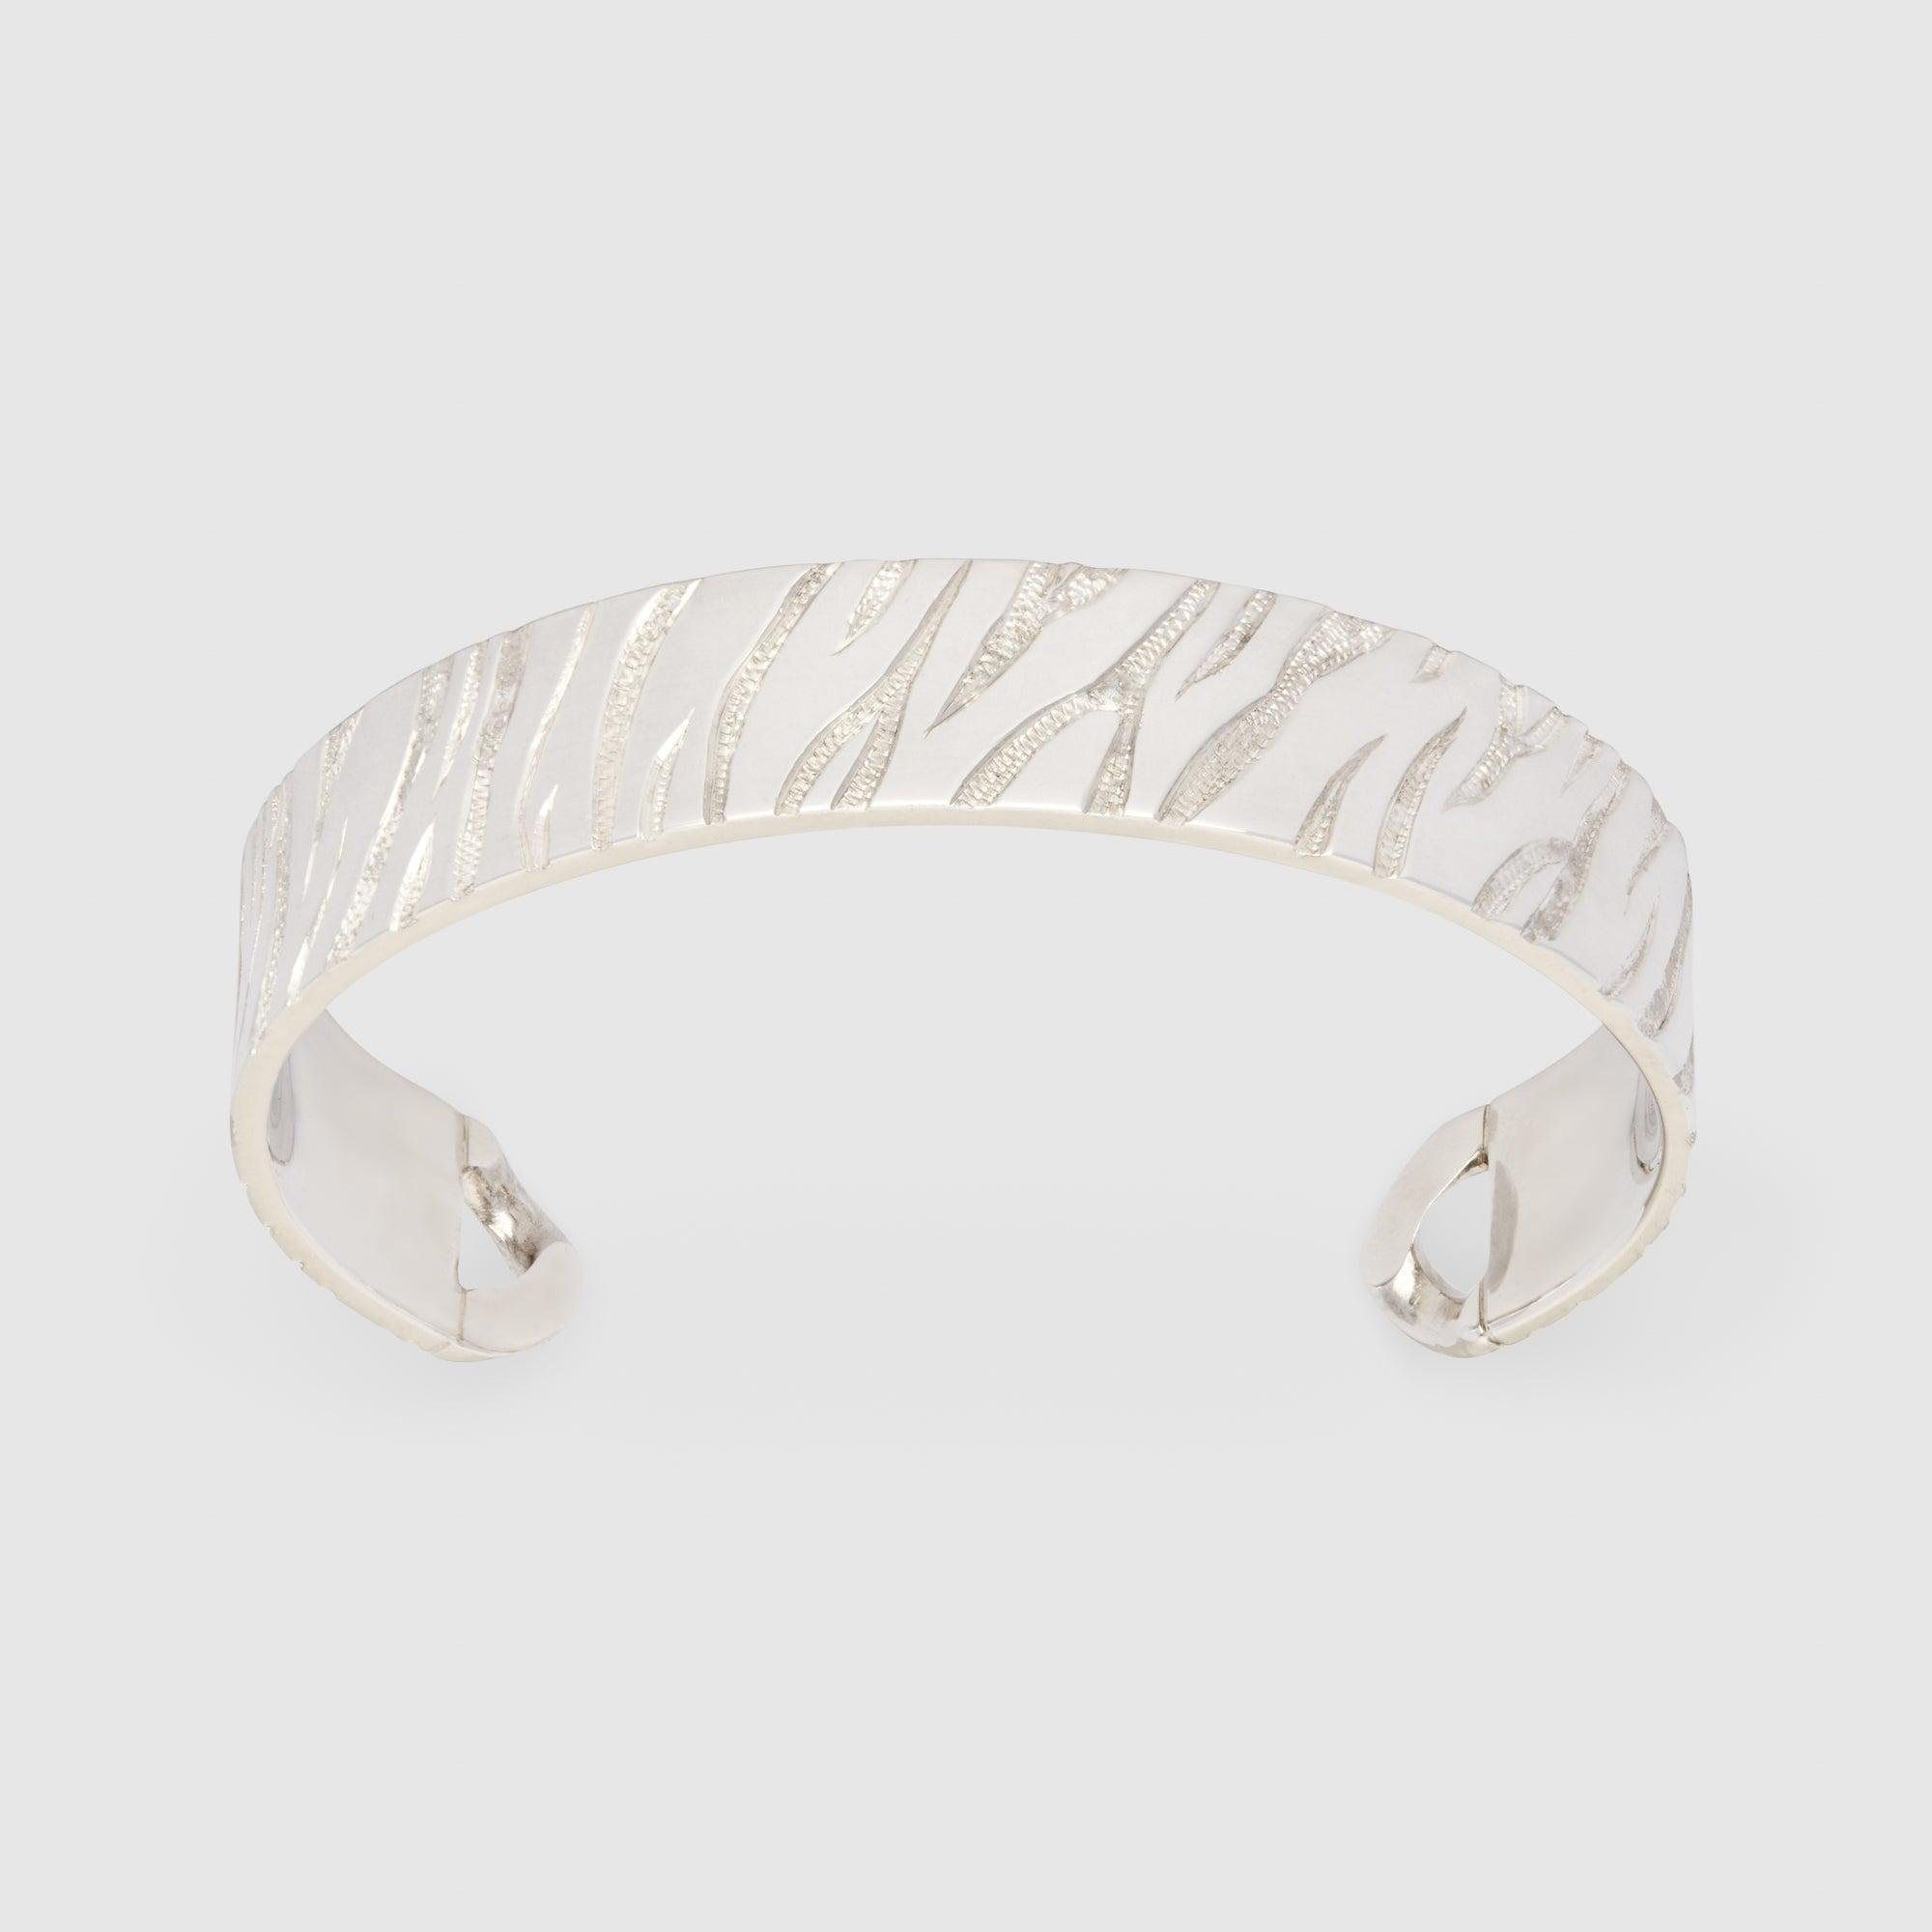 BUNNEY x DSM Exclusive ID Tiger Bar Cuff Silver by ANDREW BUNNEY